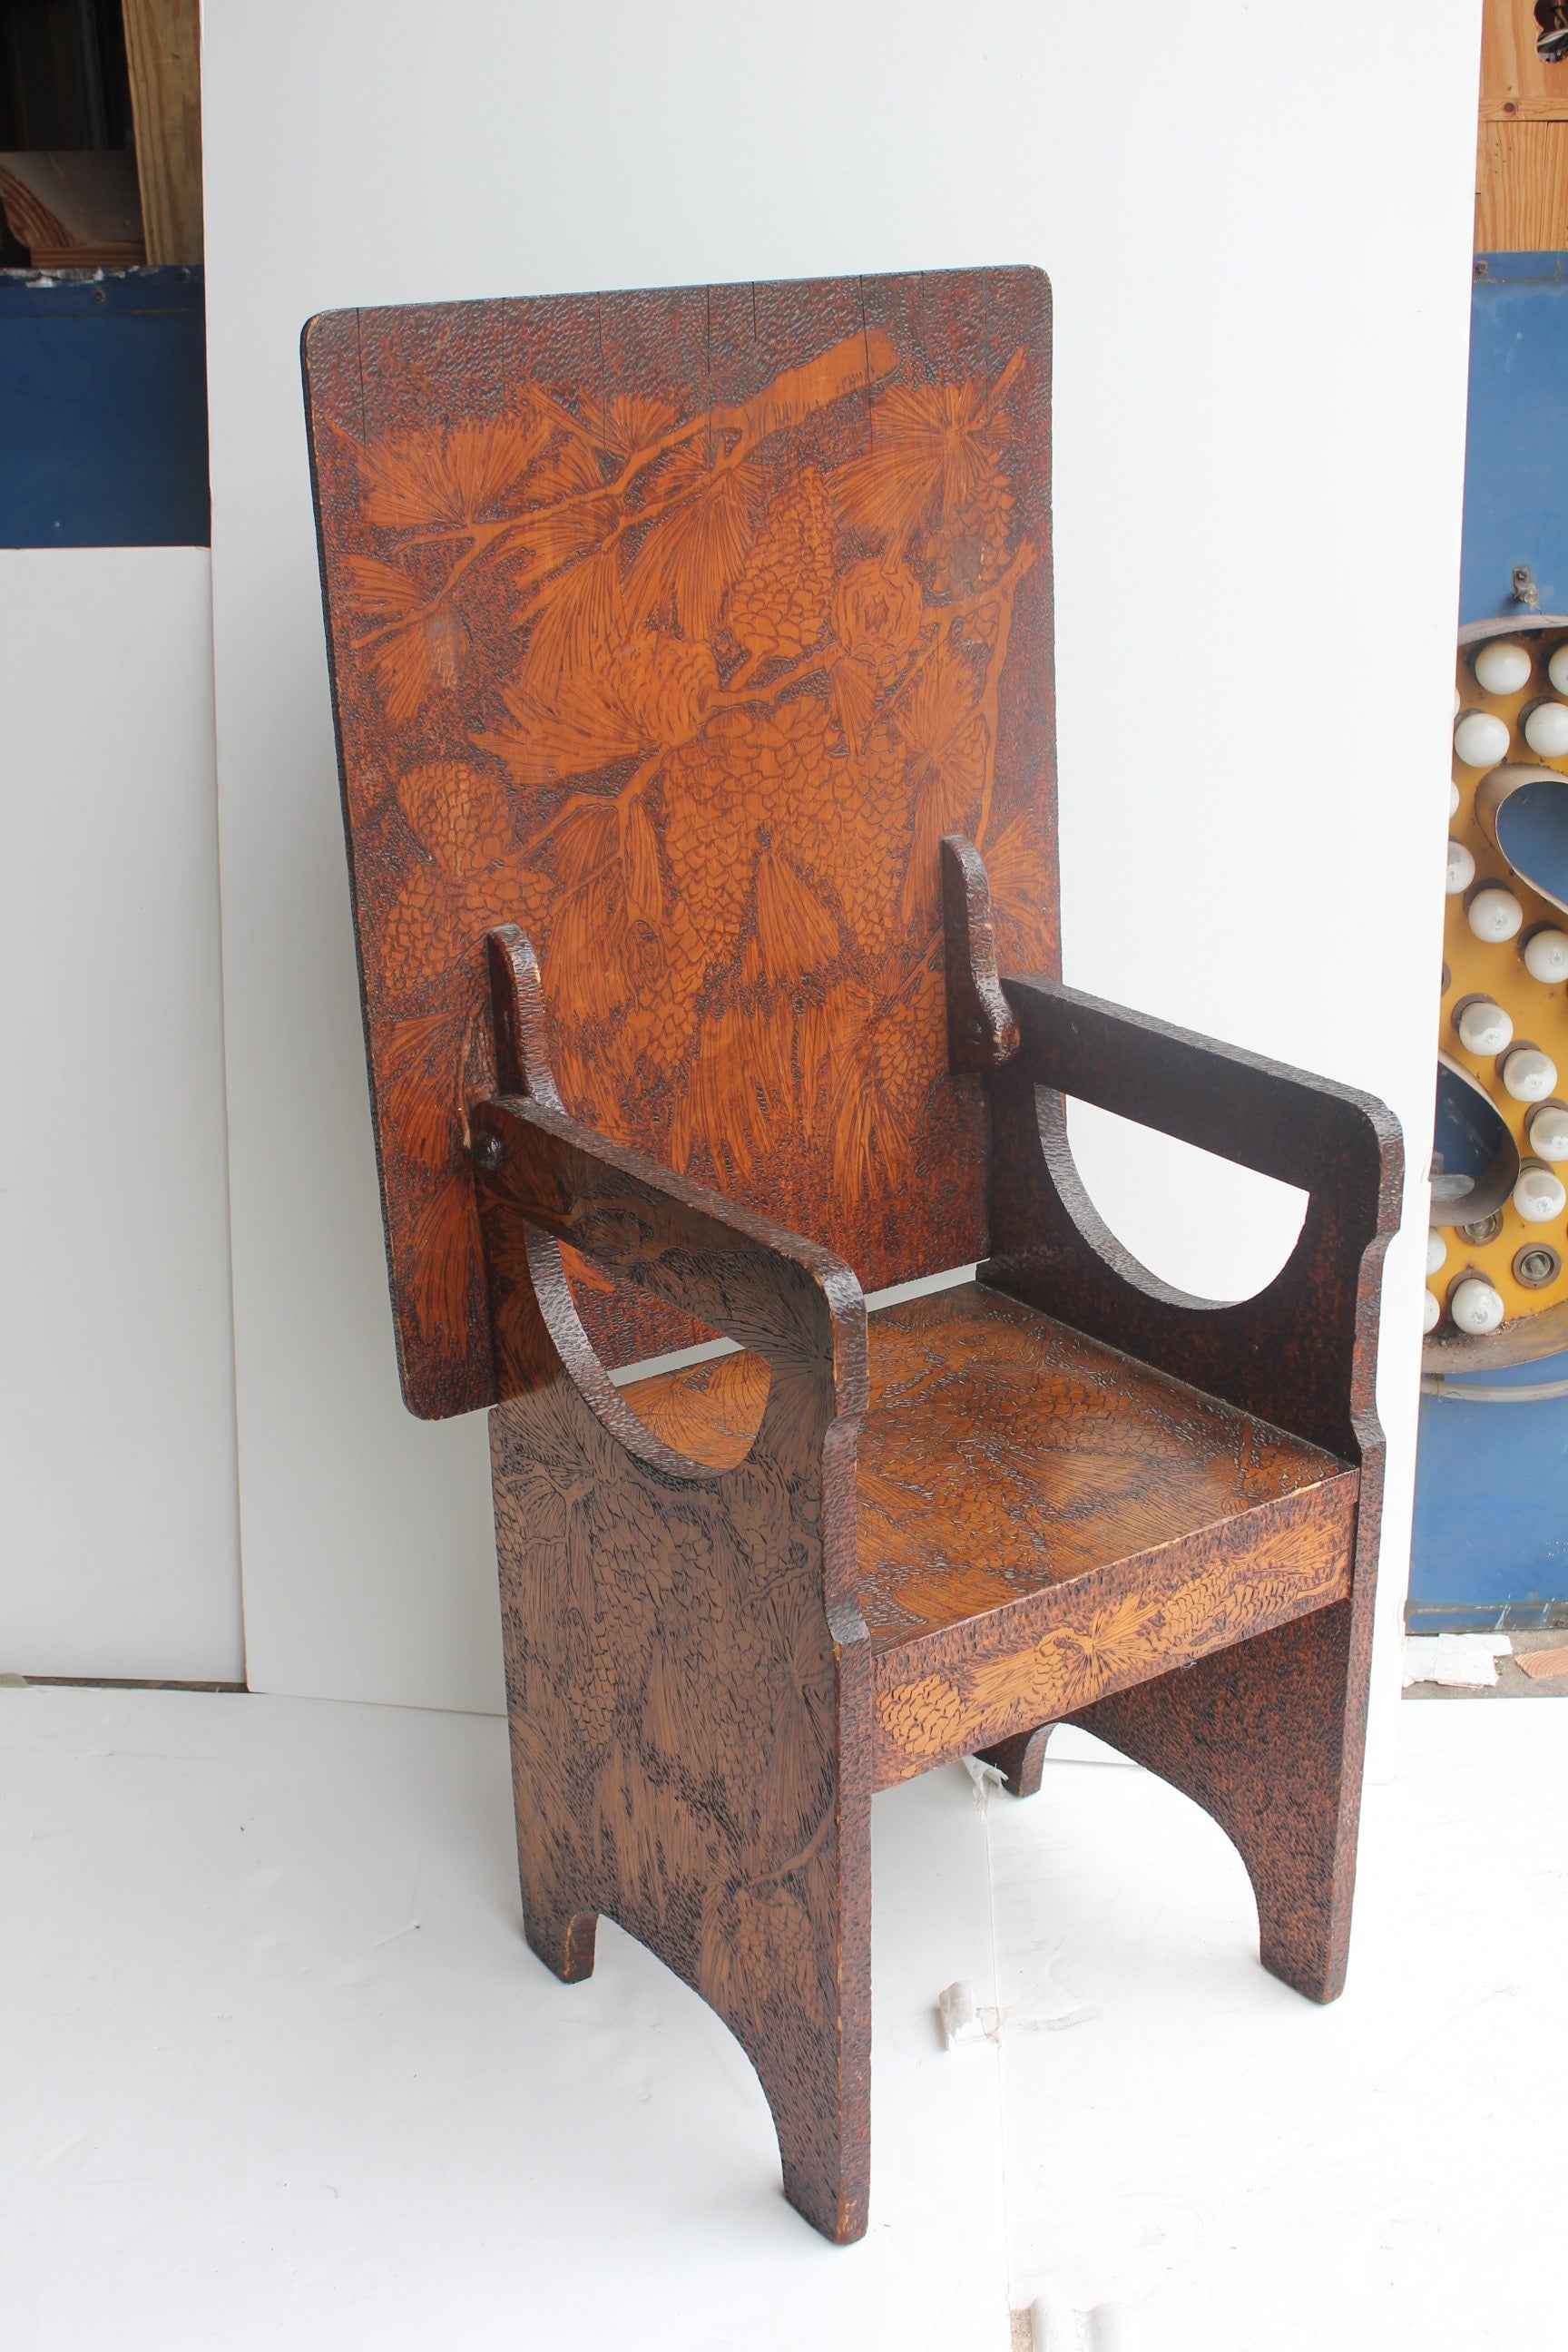 Folk Art Hand Made Wooden Chair/Table For Sale